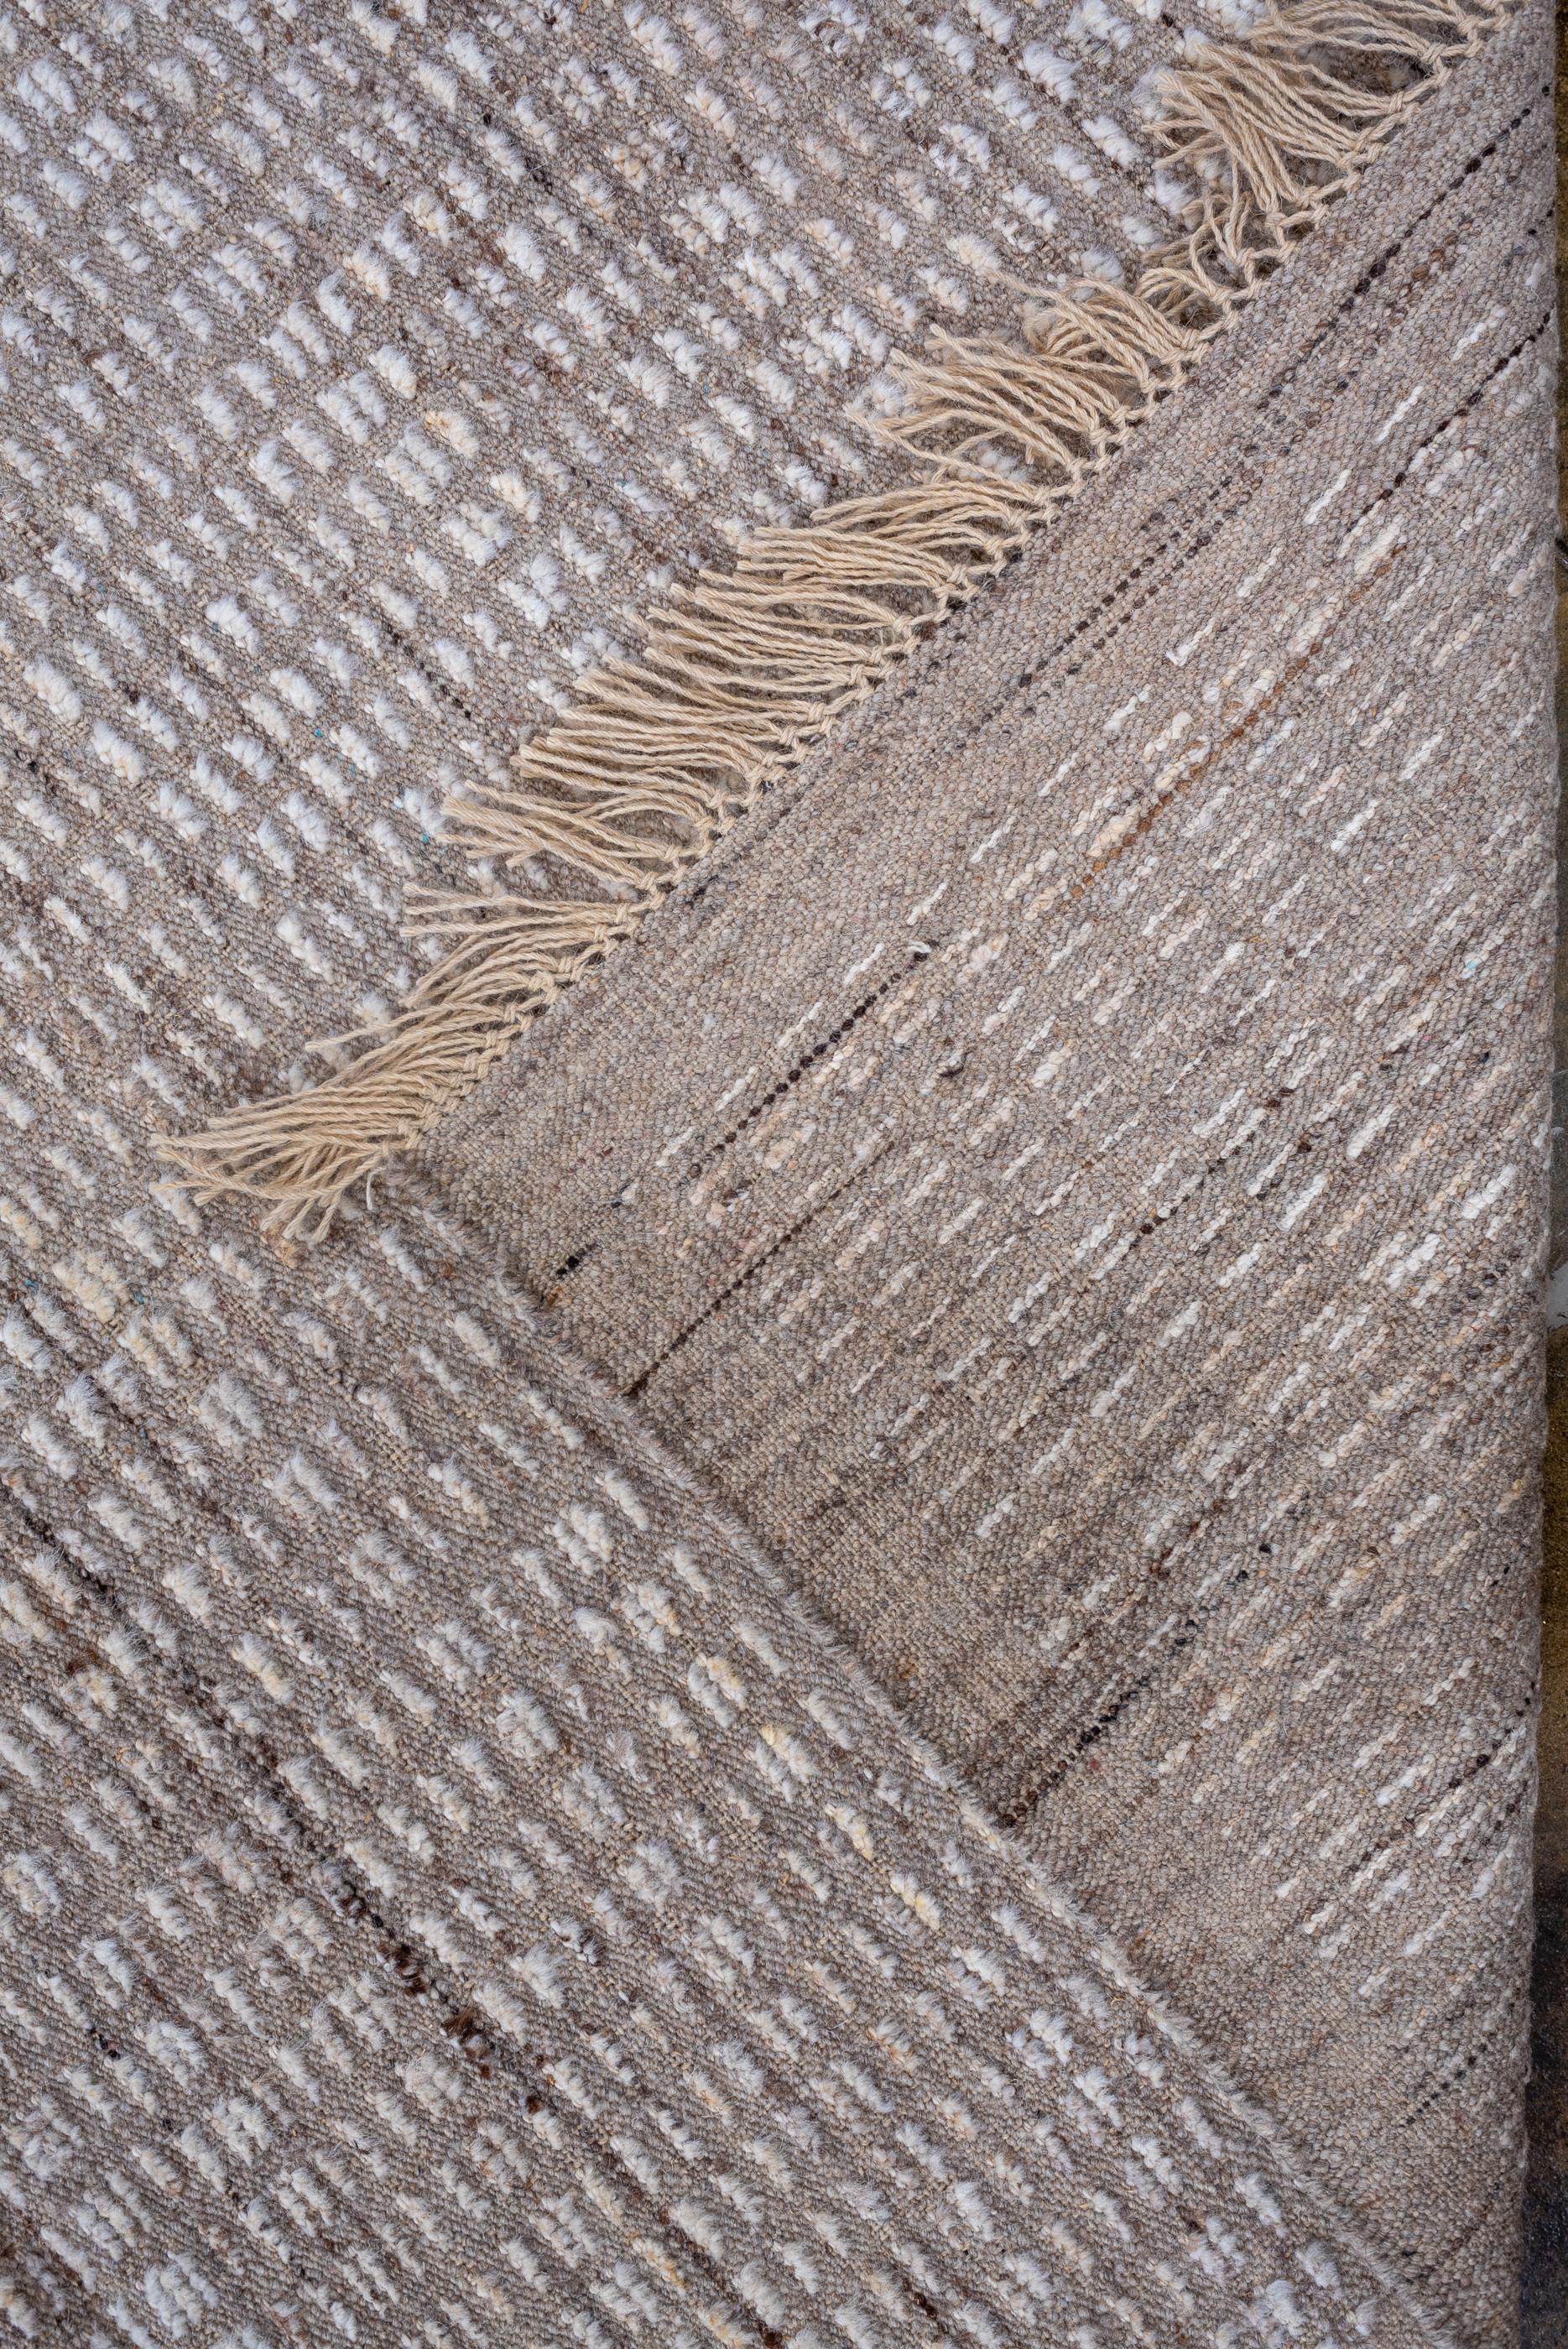 Contemporary New and Modern Tulu Design Rug